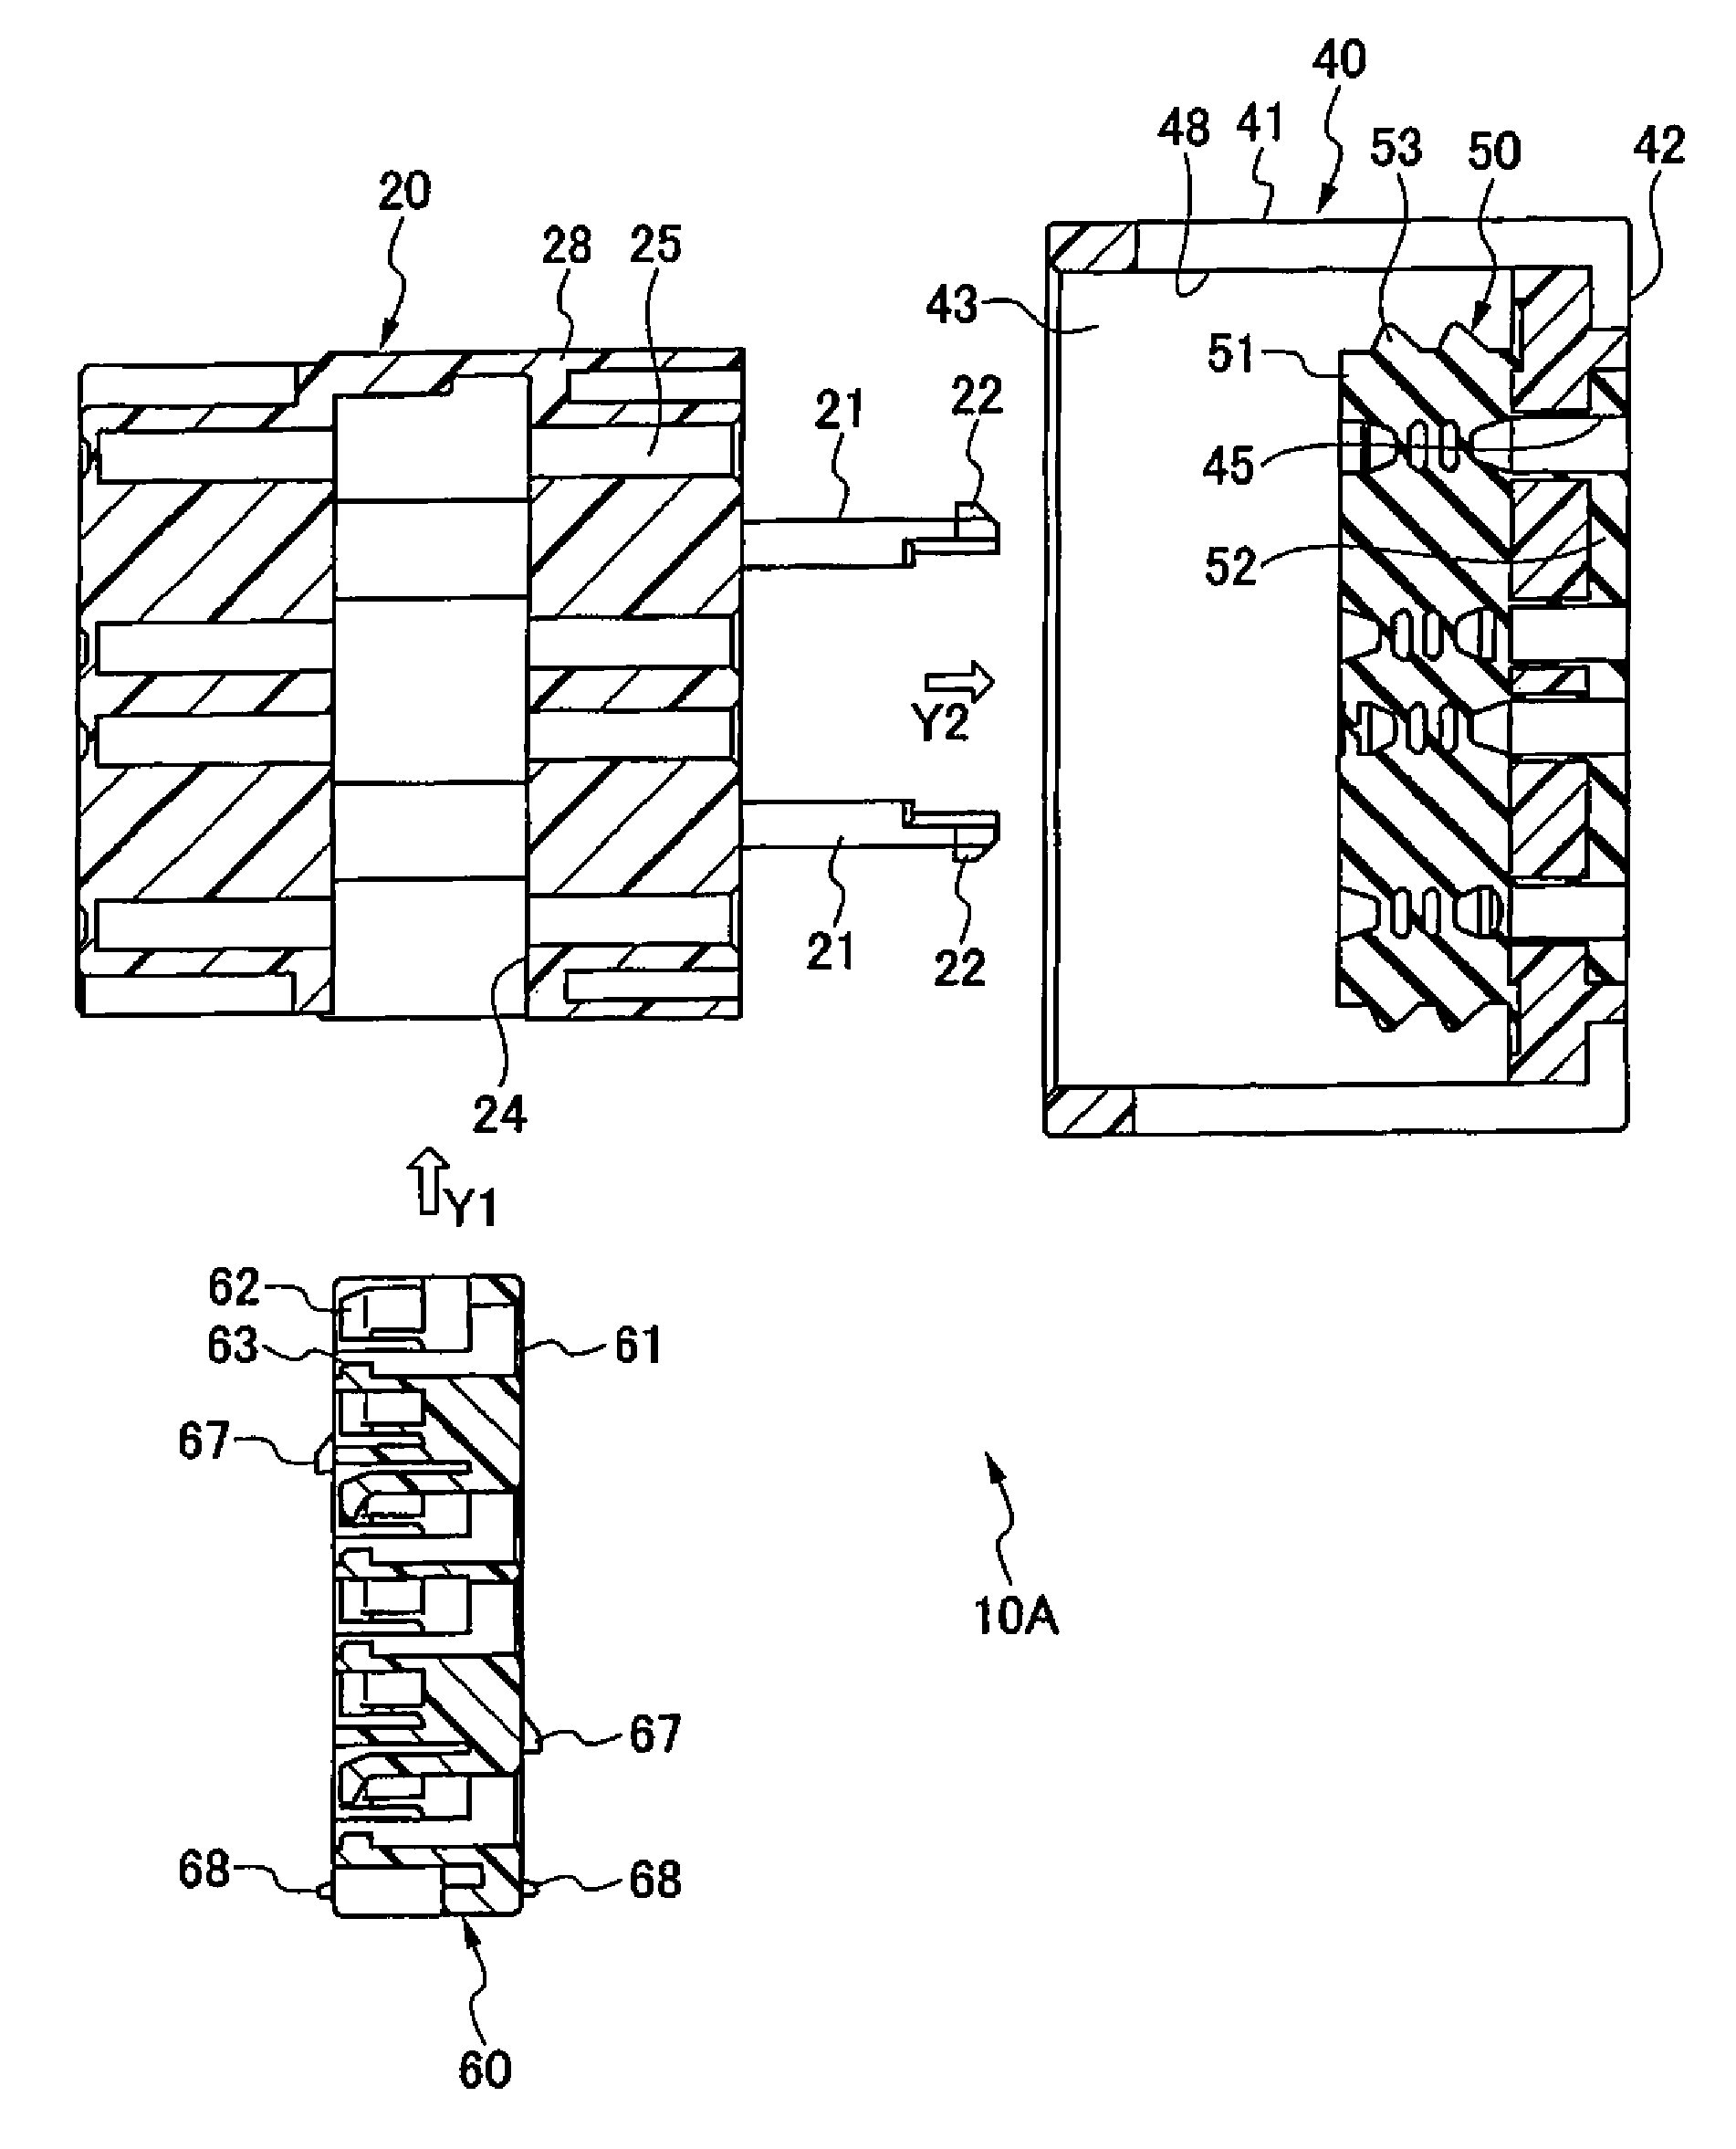 Connector for preventing terminal insertion in the terminal insert hole